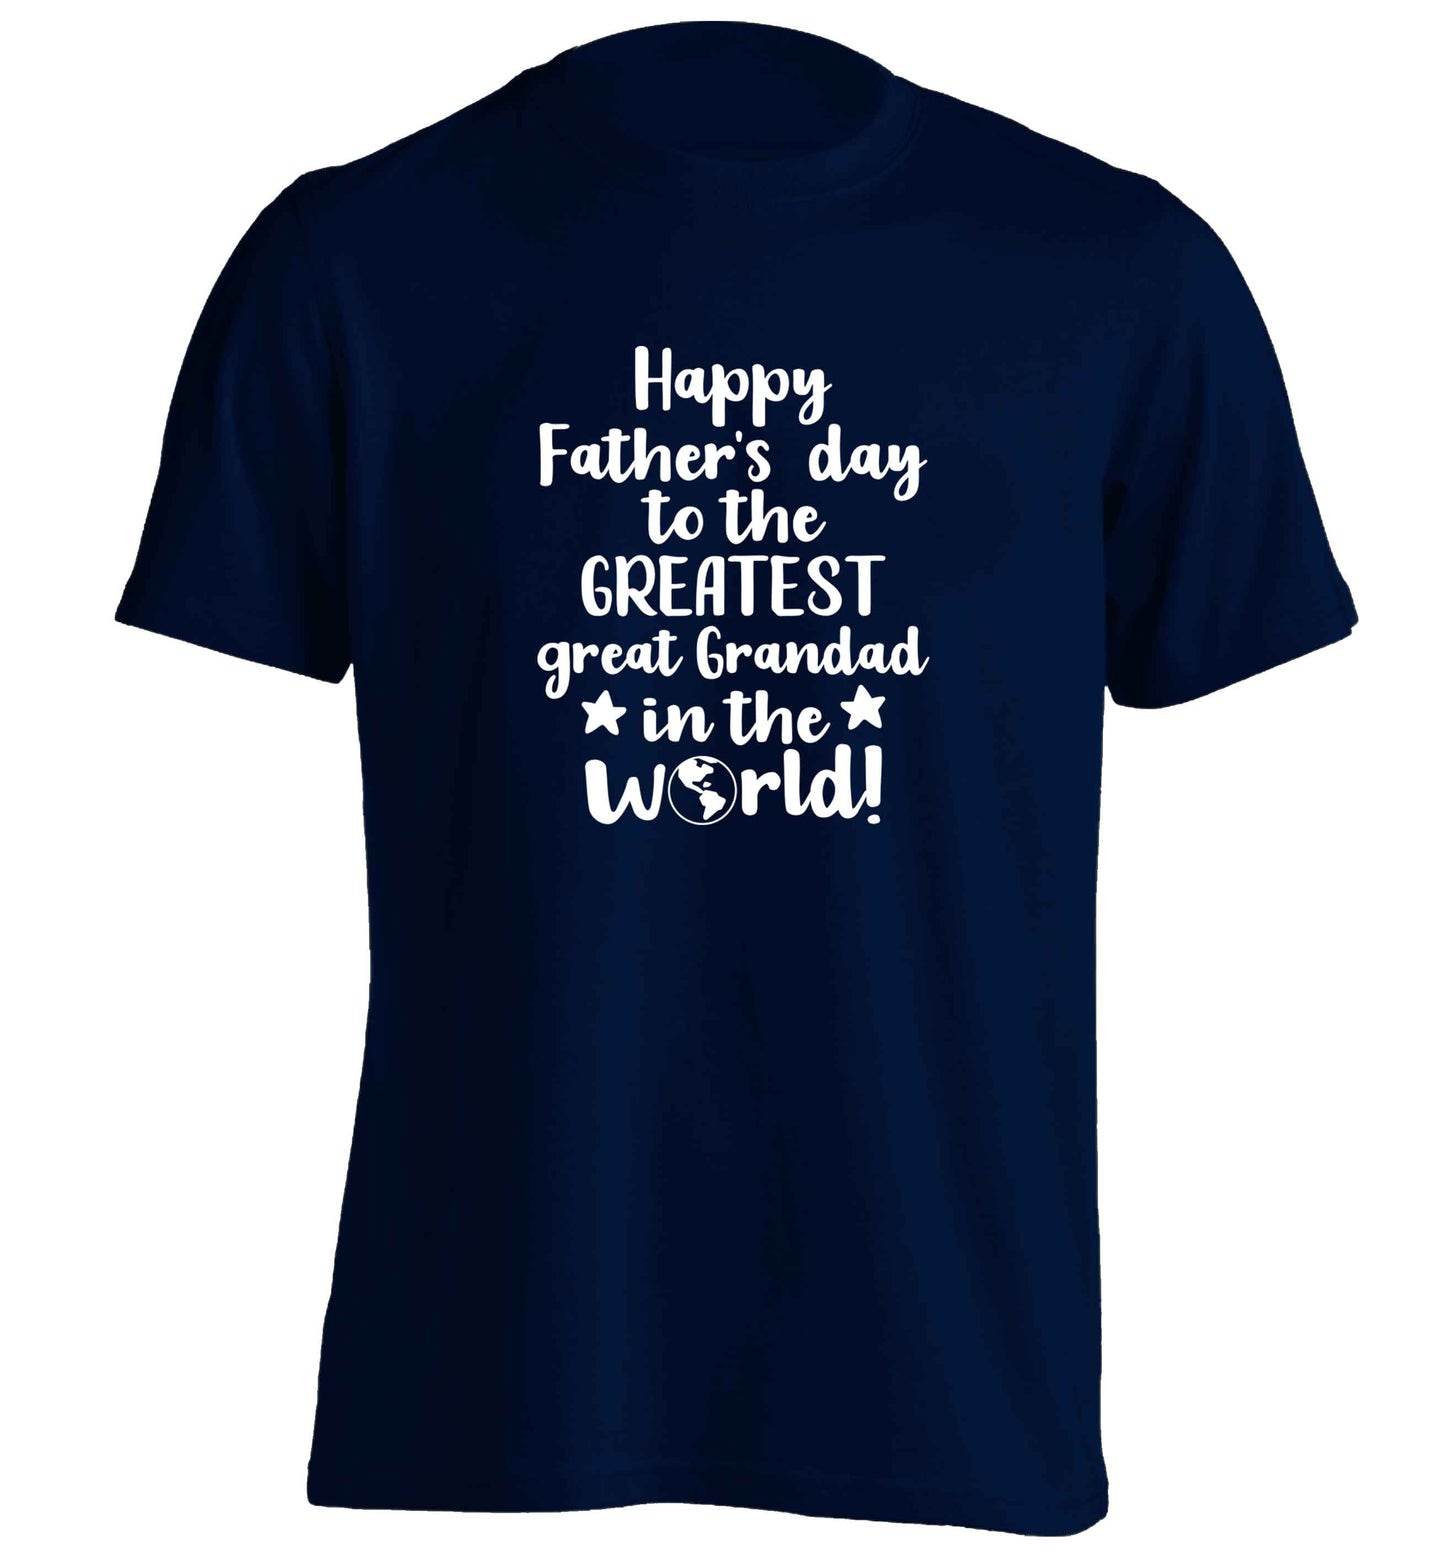 Happy Father's day to the greatest great grandad in the world adults unisex navy Tshirt 2XL